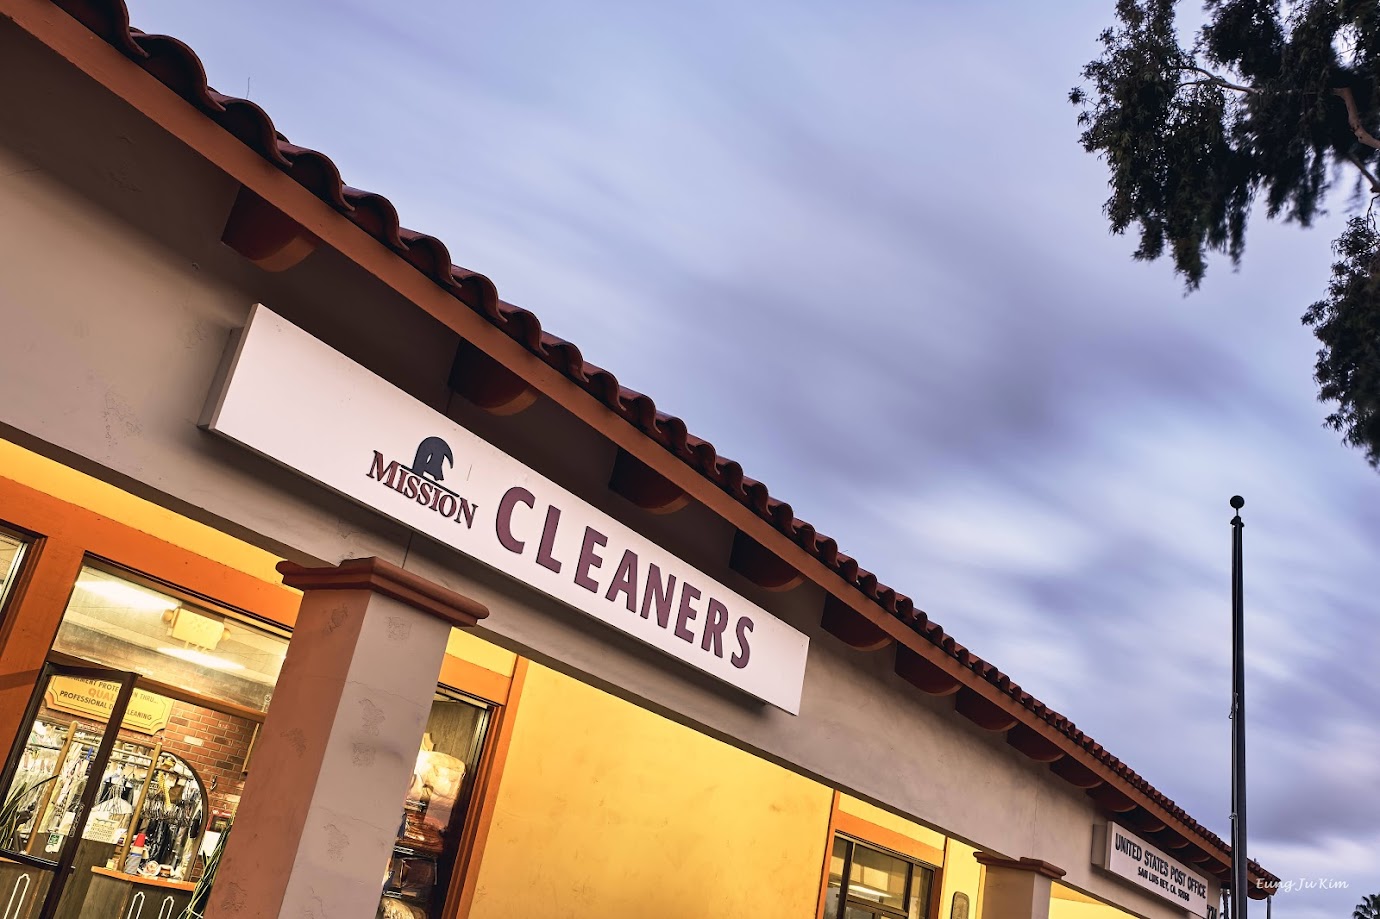 Kim's Mission Cleaners